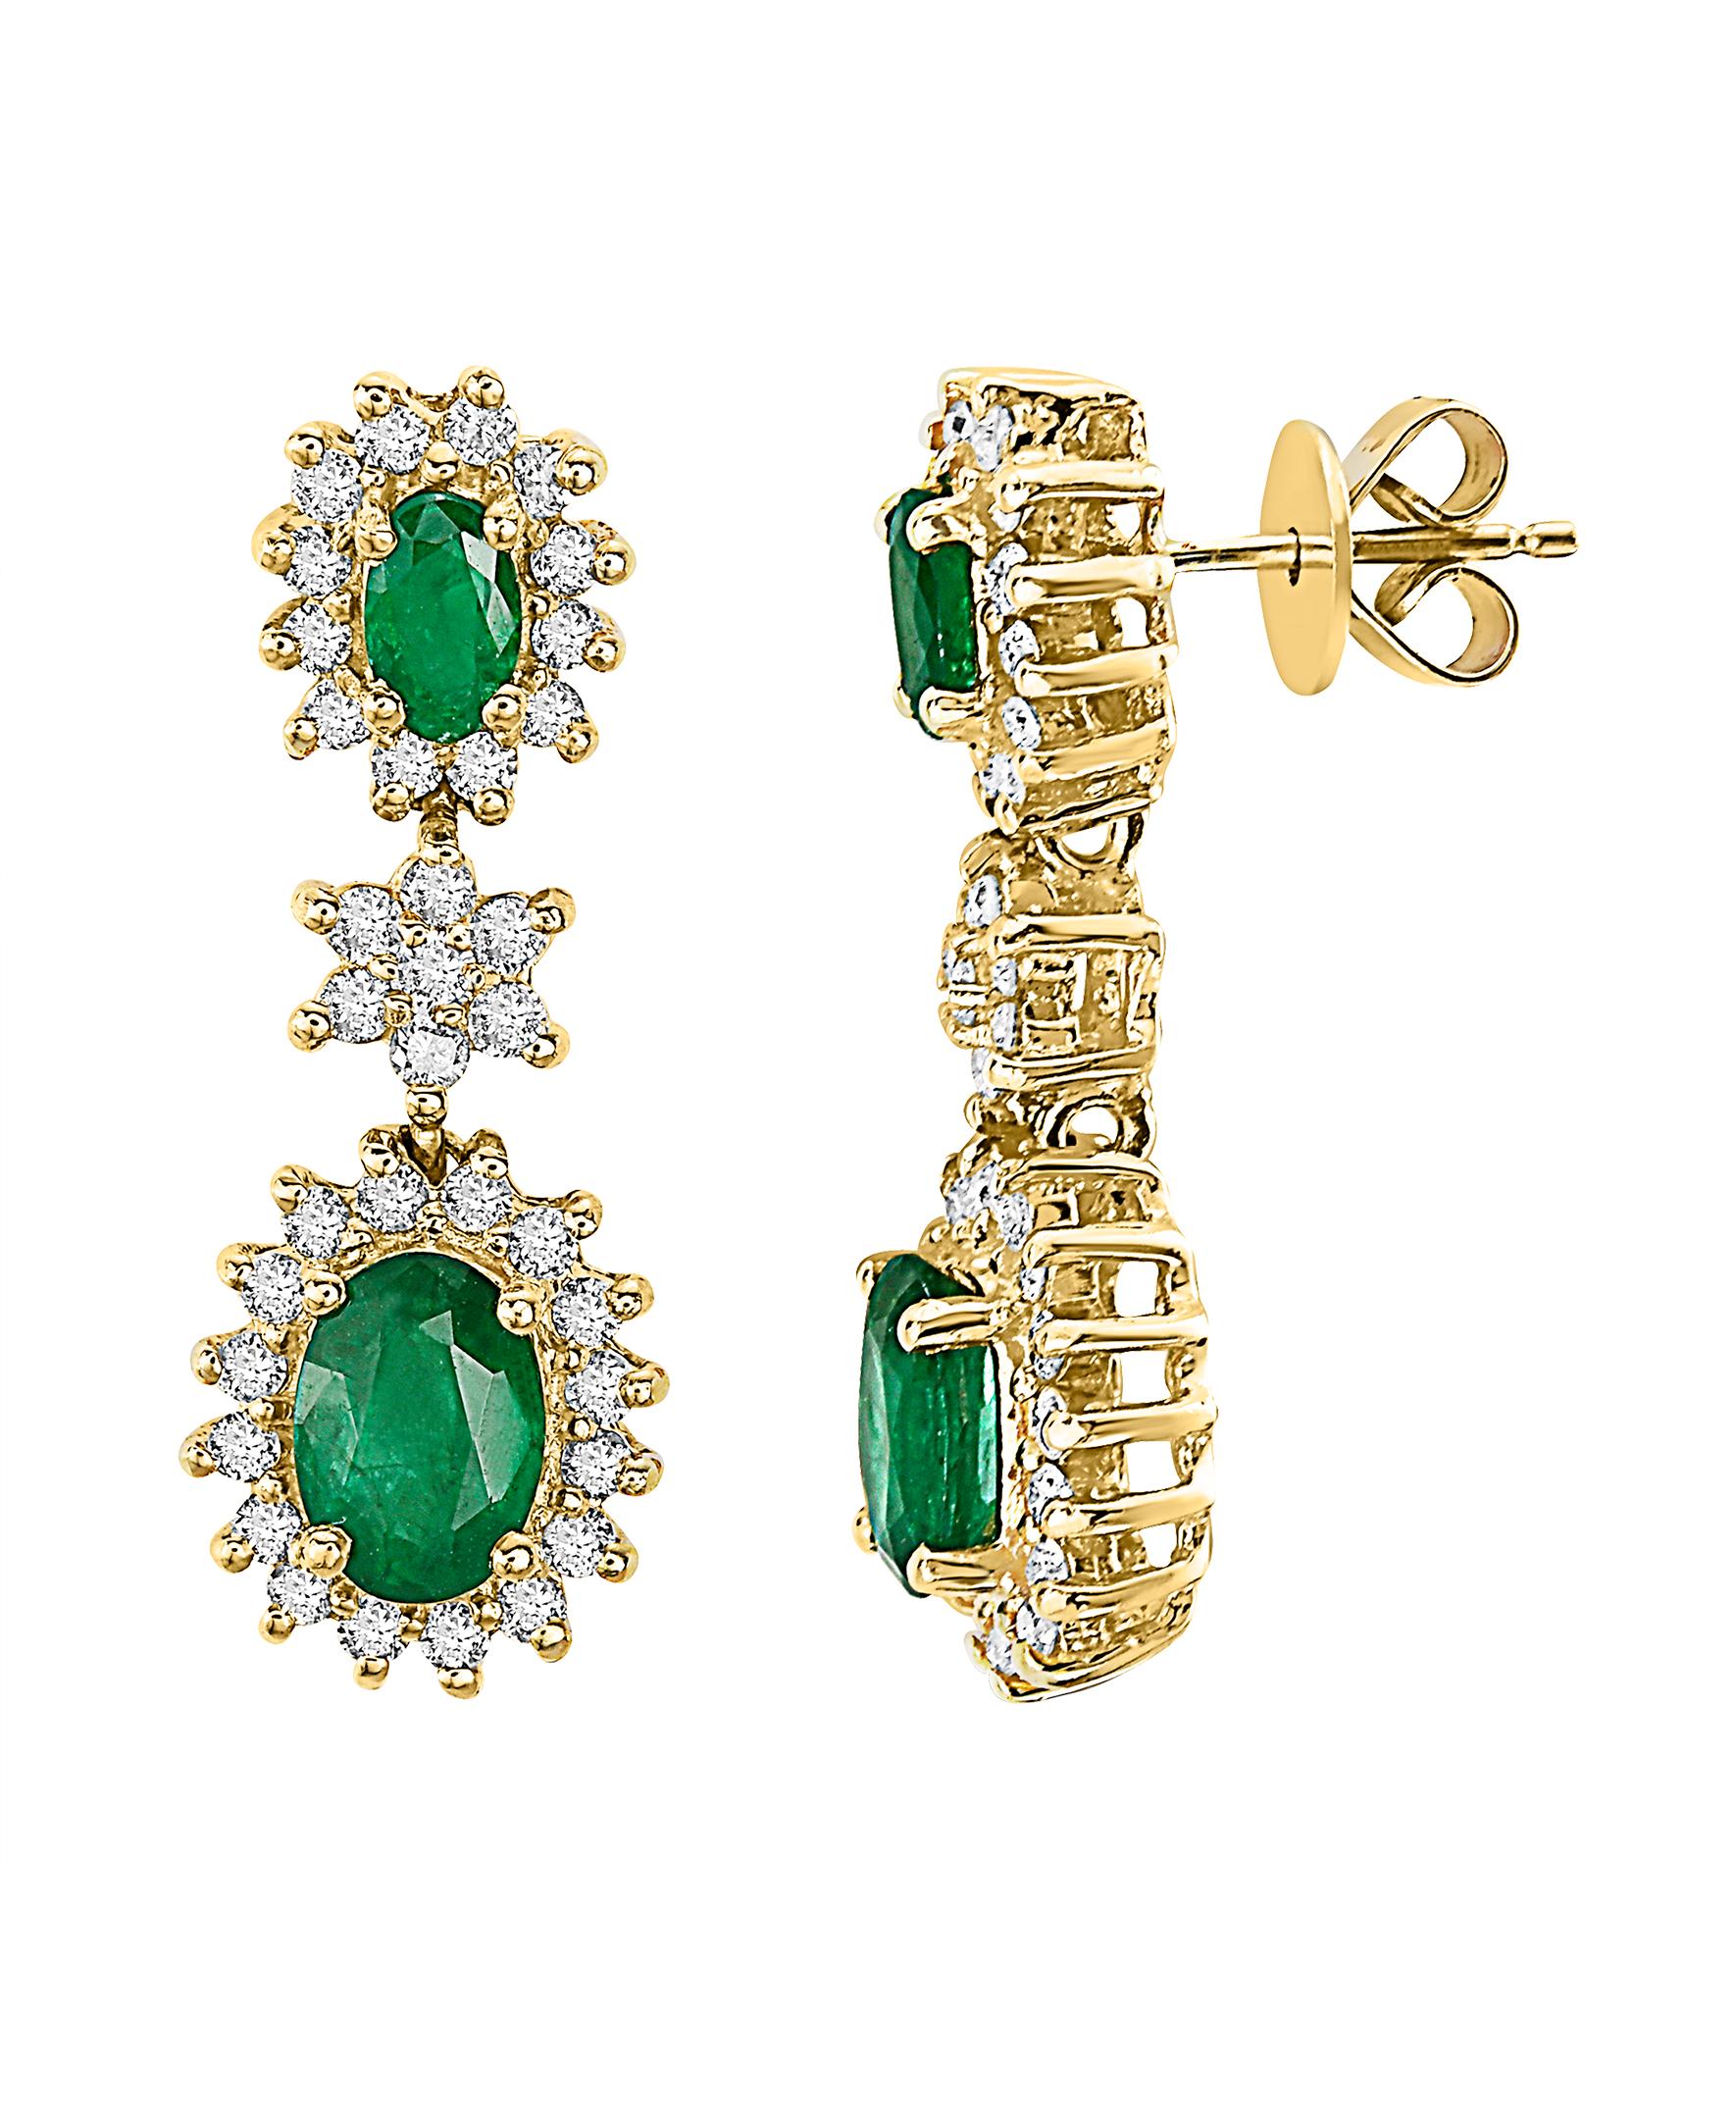 These Effy design earrings are set in 14K Yellow gold. The center stones are two pairs of Oval shape Emeralds, and their total weight is 2.00 ct.
The design is accented by round shape diamonds, with a total weight of 0.90 ct.

The item number is